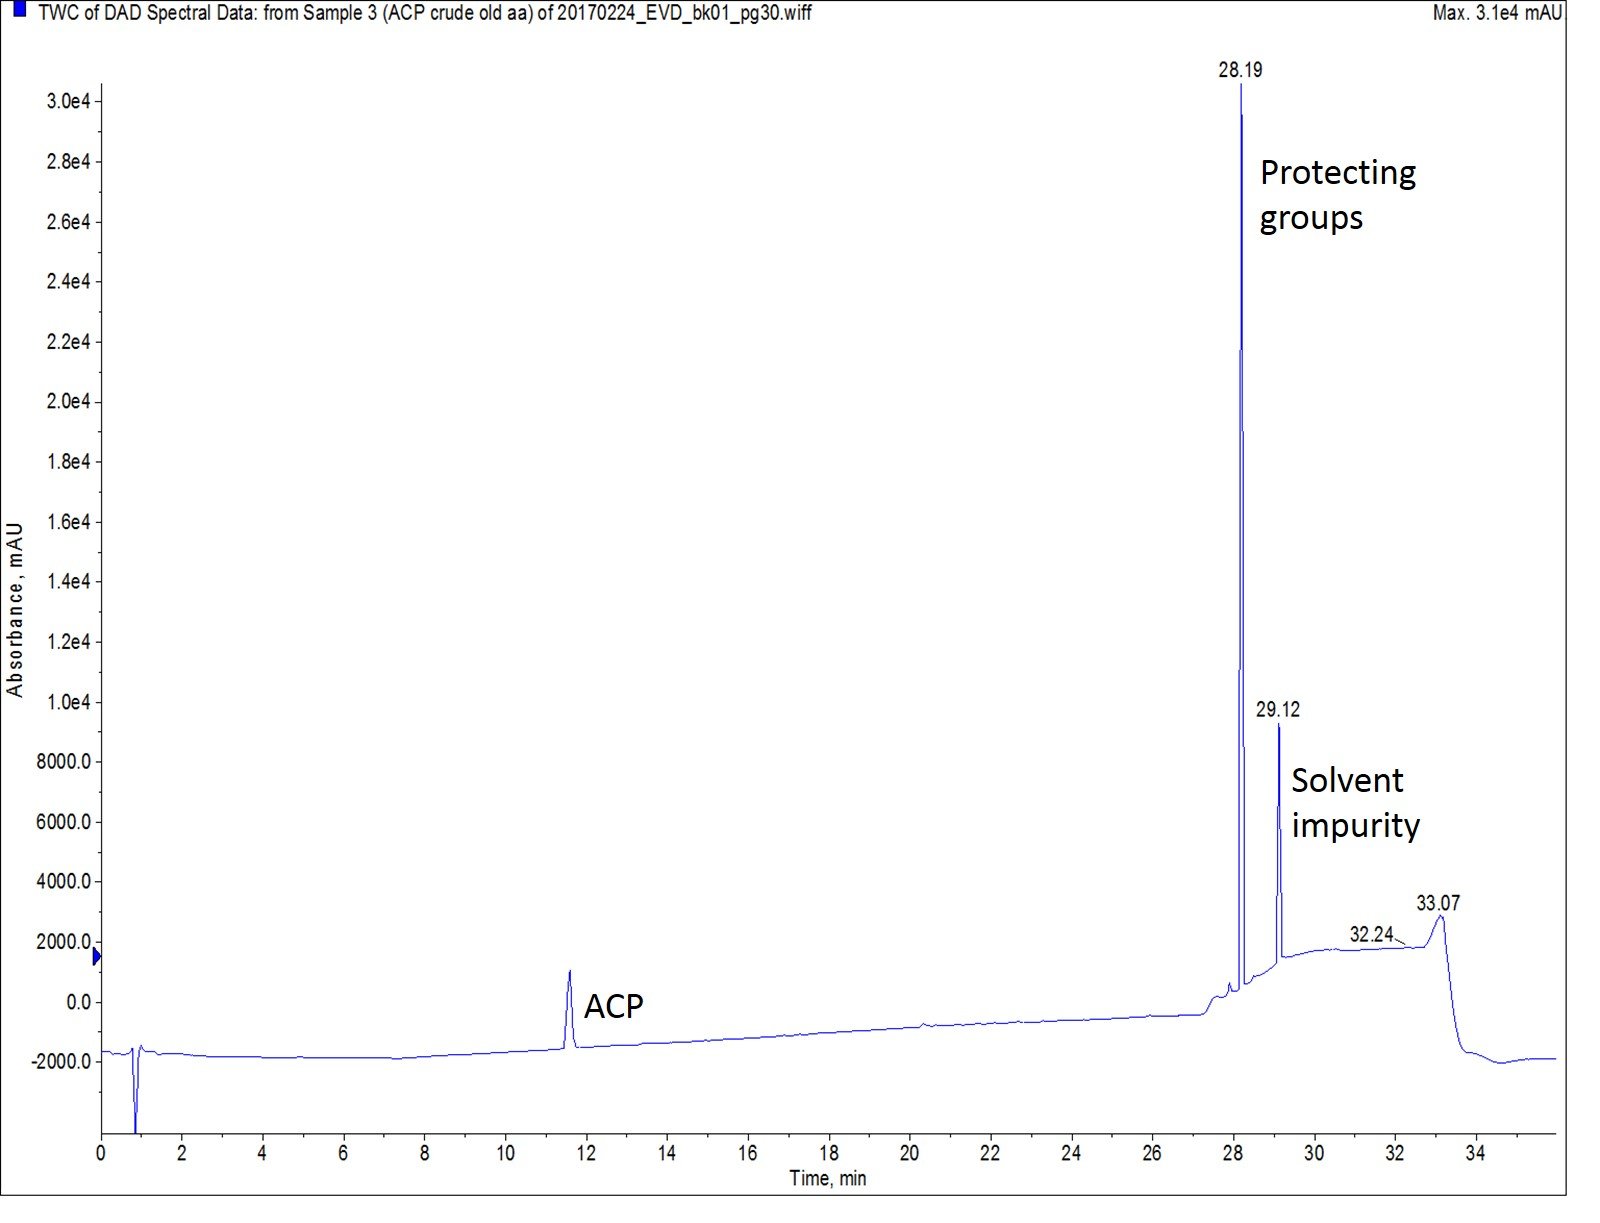 Figure 2: Crude analytical HPLC for ACP synthesized using amino acid solutions prepared 6 weeks earlier and stored at 4ºC.